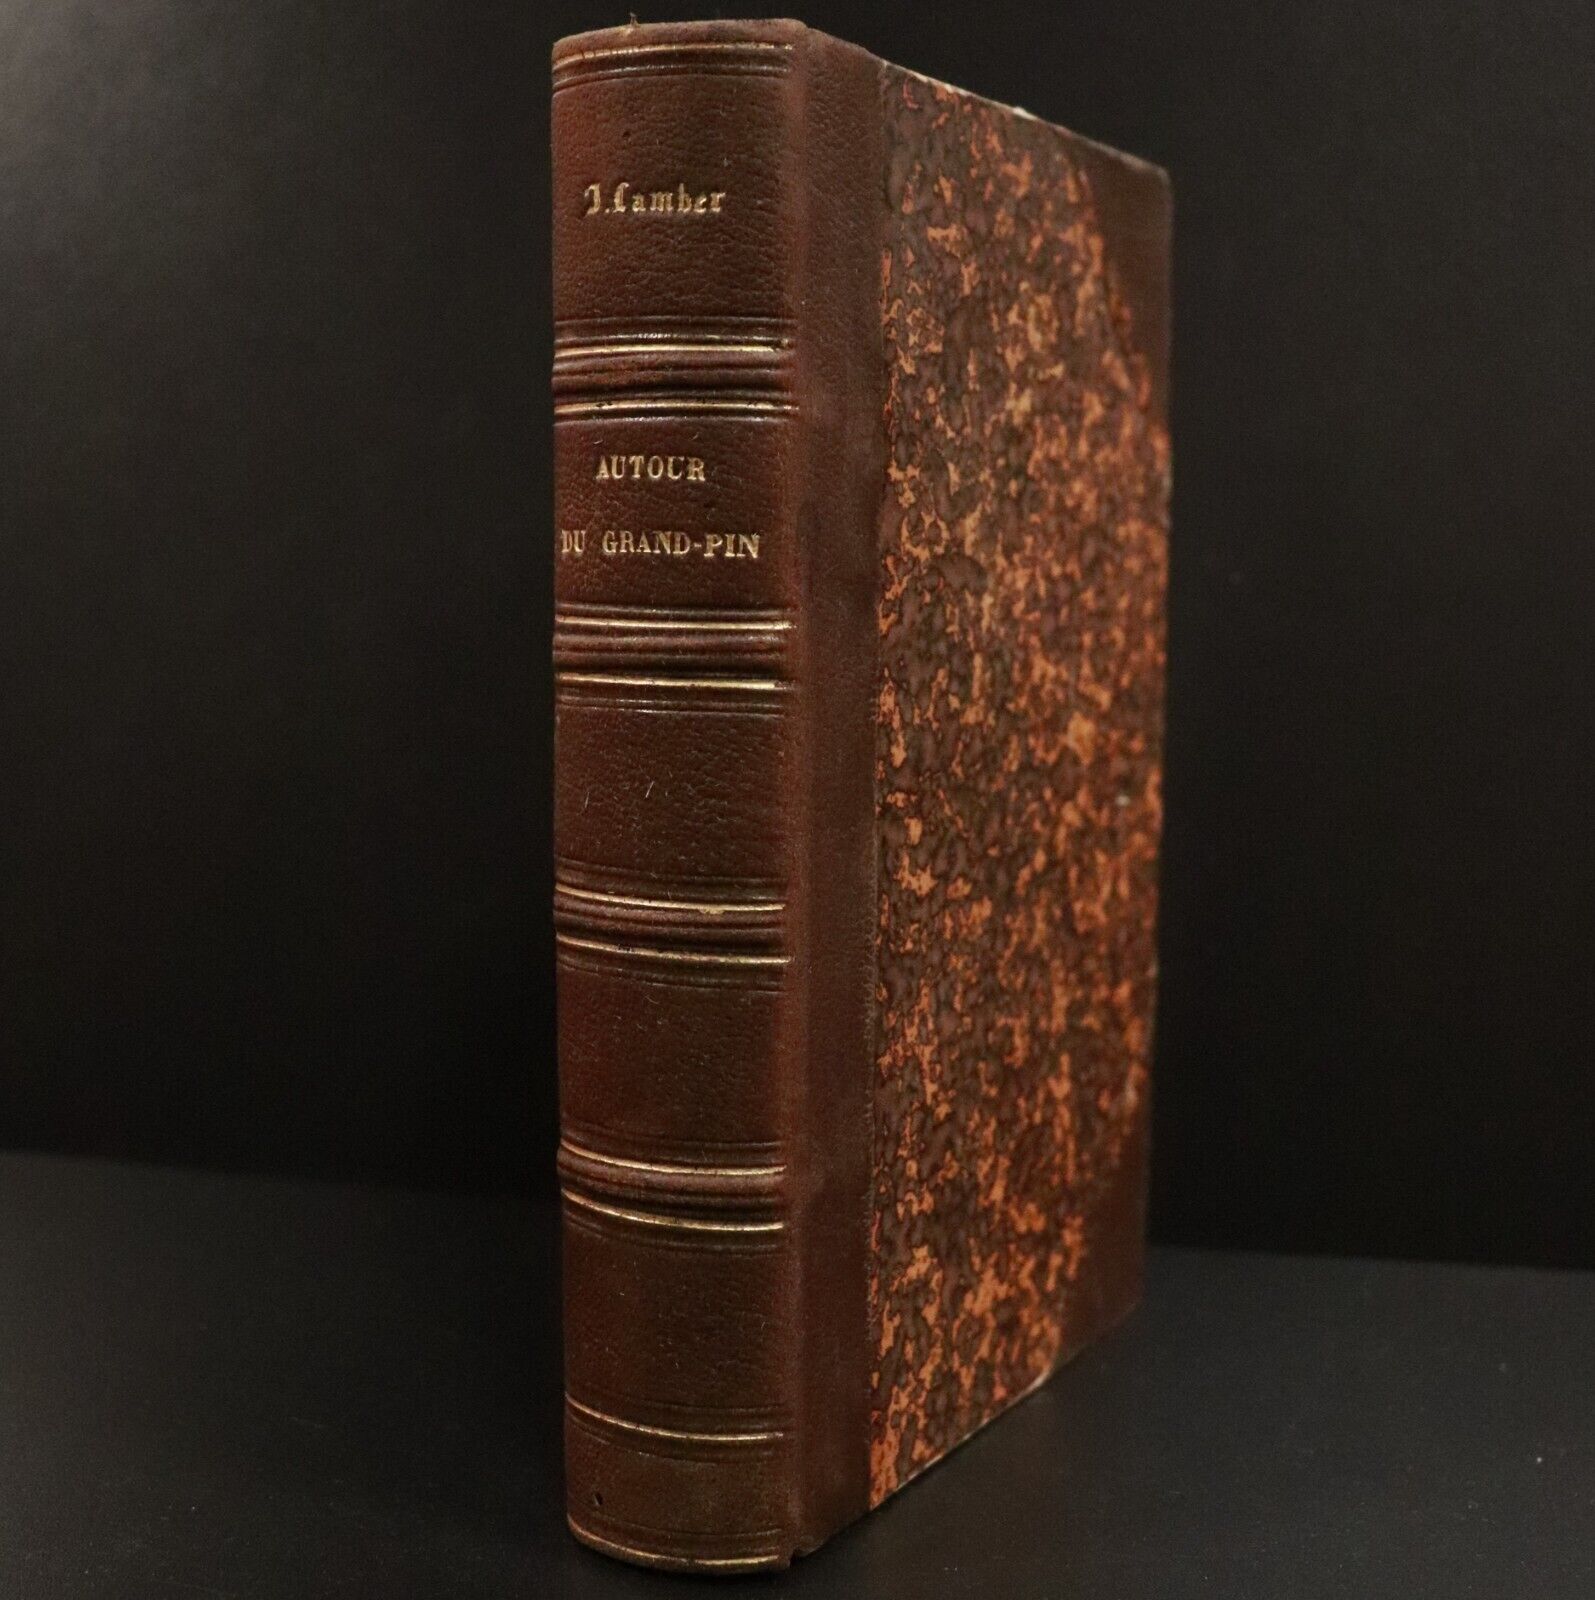 1863 Voyage Autour Du Grand Pin by Juliette Lamber Antiquarian French Book